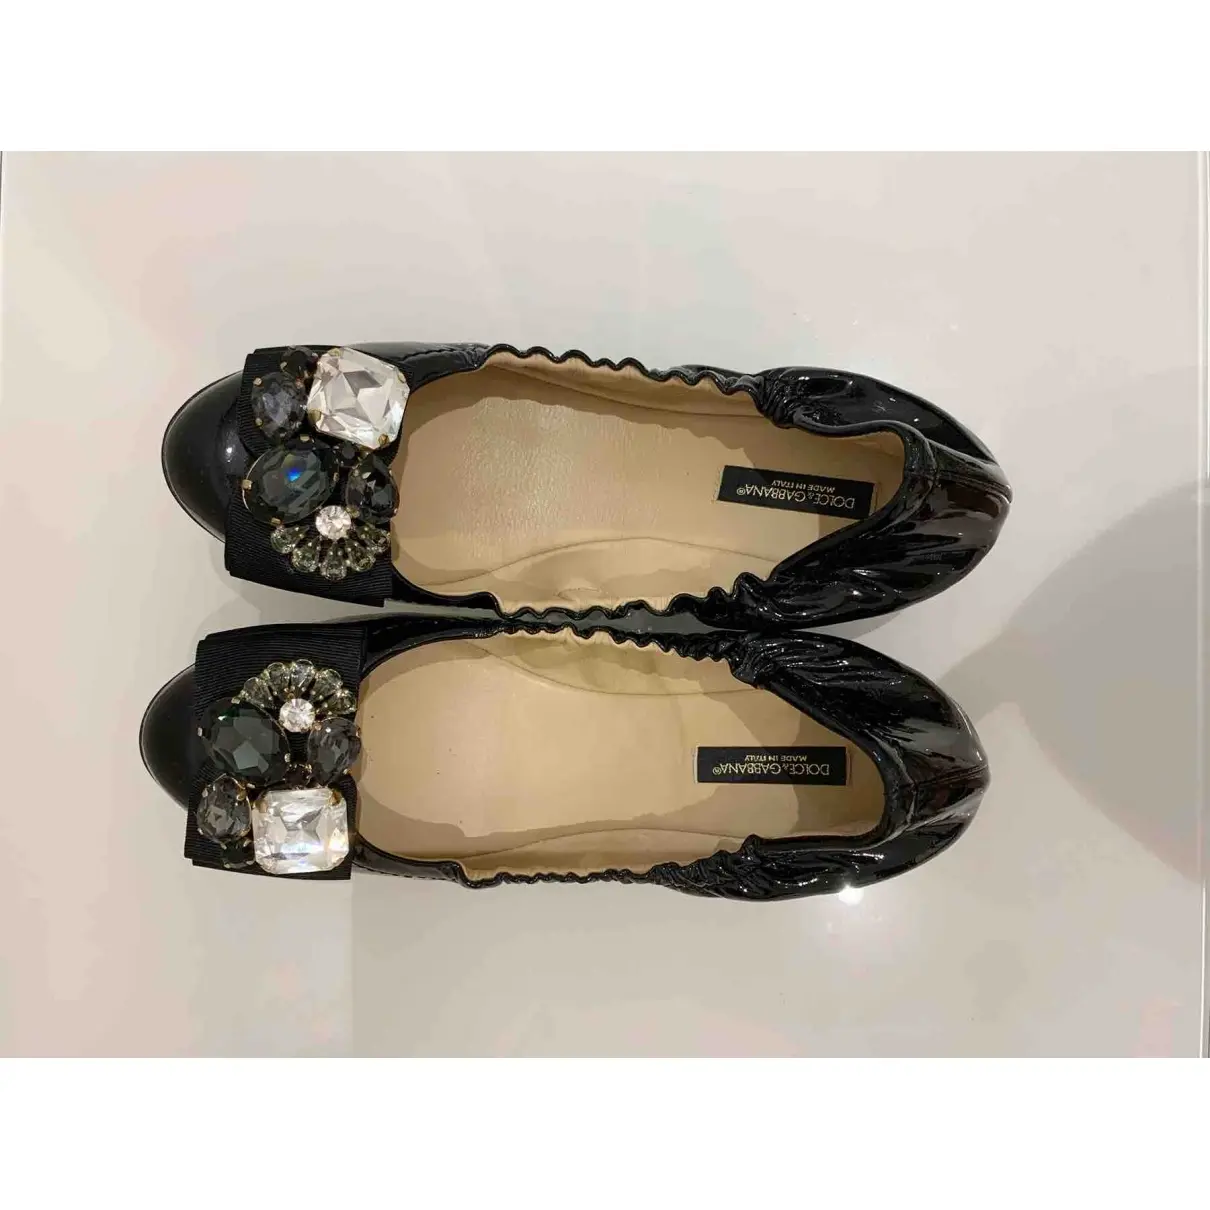 Dolce & Gabbana Patent leather ballet flats for sale